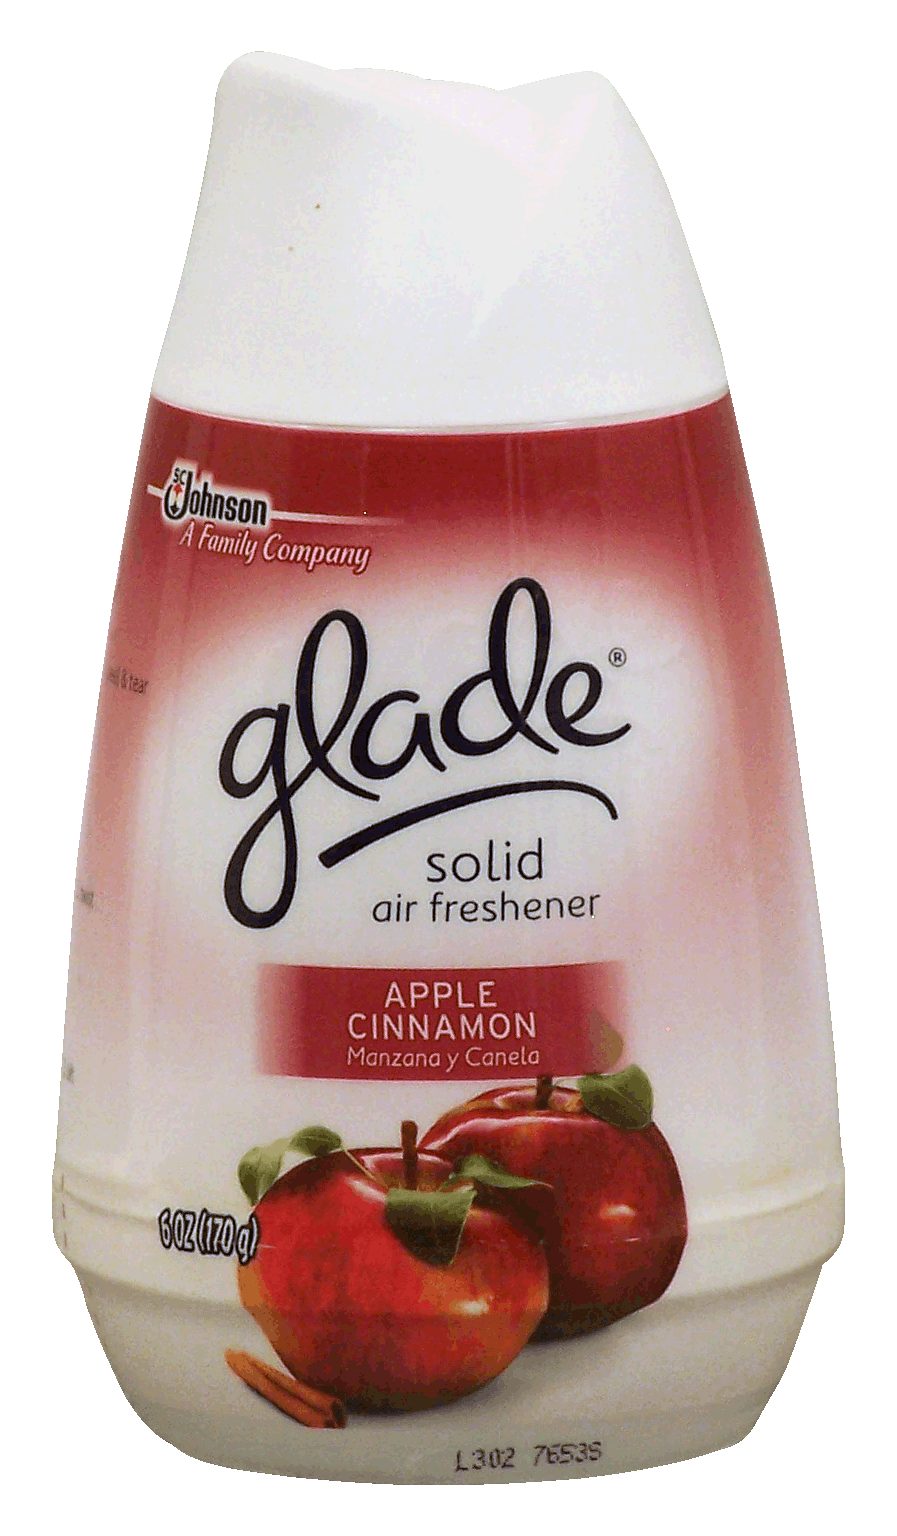 Glade  solid air freshener, apple cinnamon scent Full-Size Picture